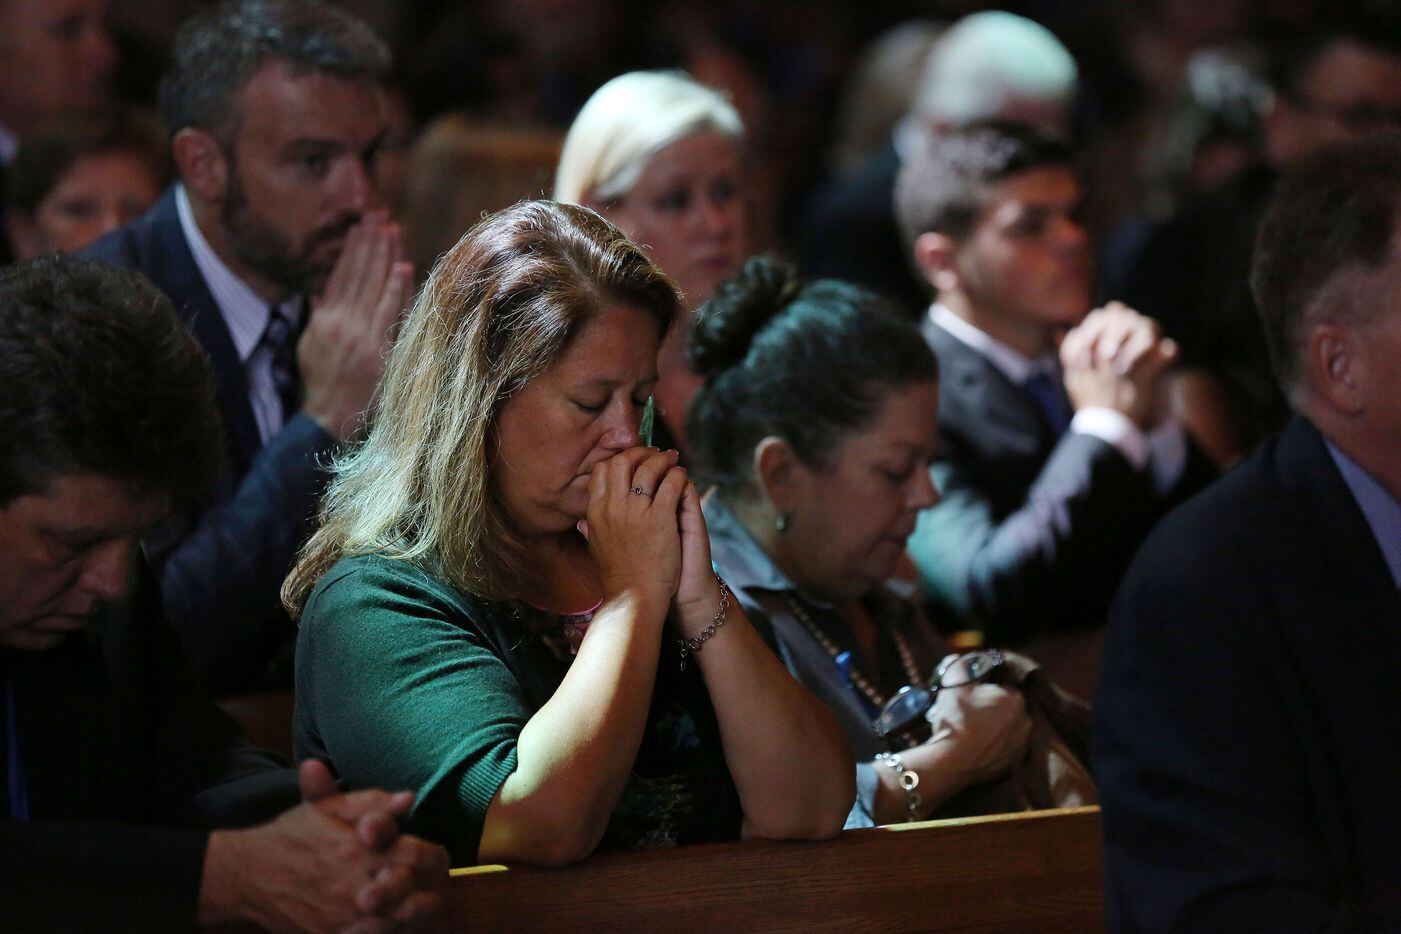 Worshippers mourn during the funeral for Dallas police sergeant Michael Smith.